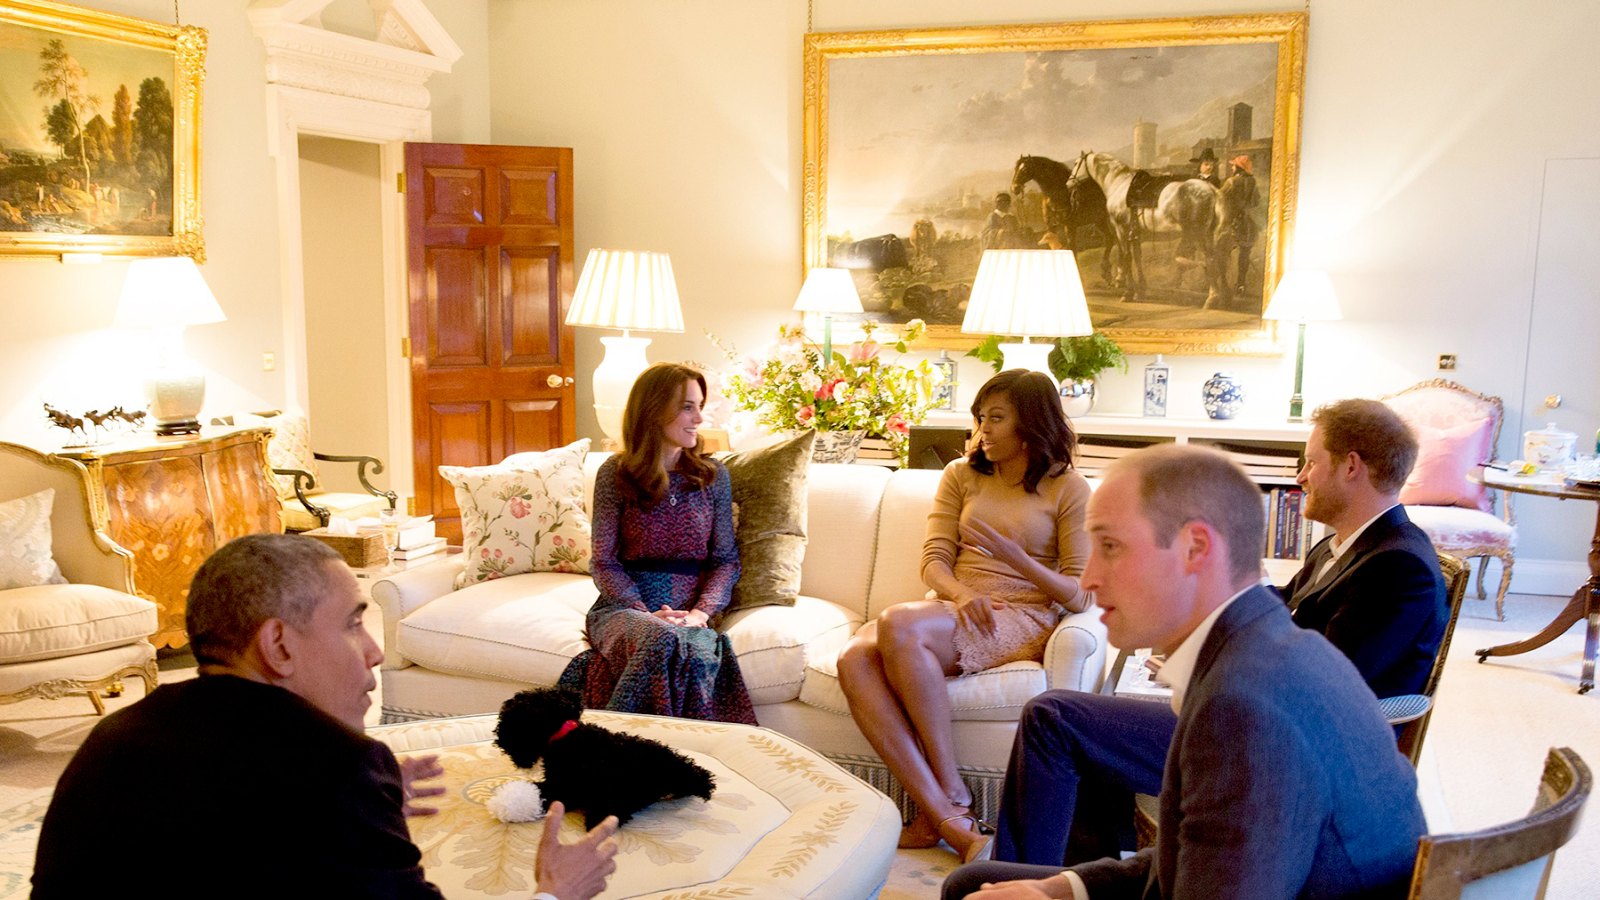 US President Barack Obama (L), Britain's Prince William, Duke of Cambridge (R) US First Lady Michelle Obama (2L), Catherine, Duchess of Cambridge (L) and Britain's Prince Harry (C) sit together in a reception room at Kensington Palace in London, April 22, 2016.